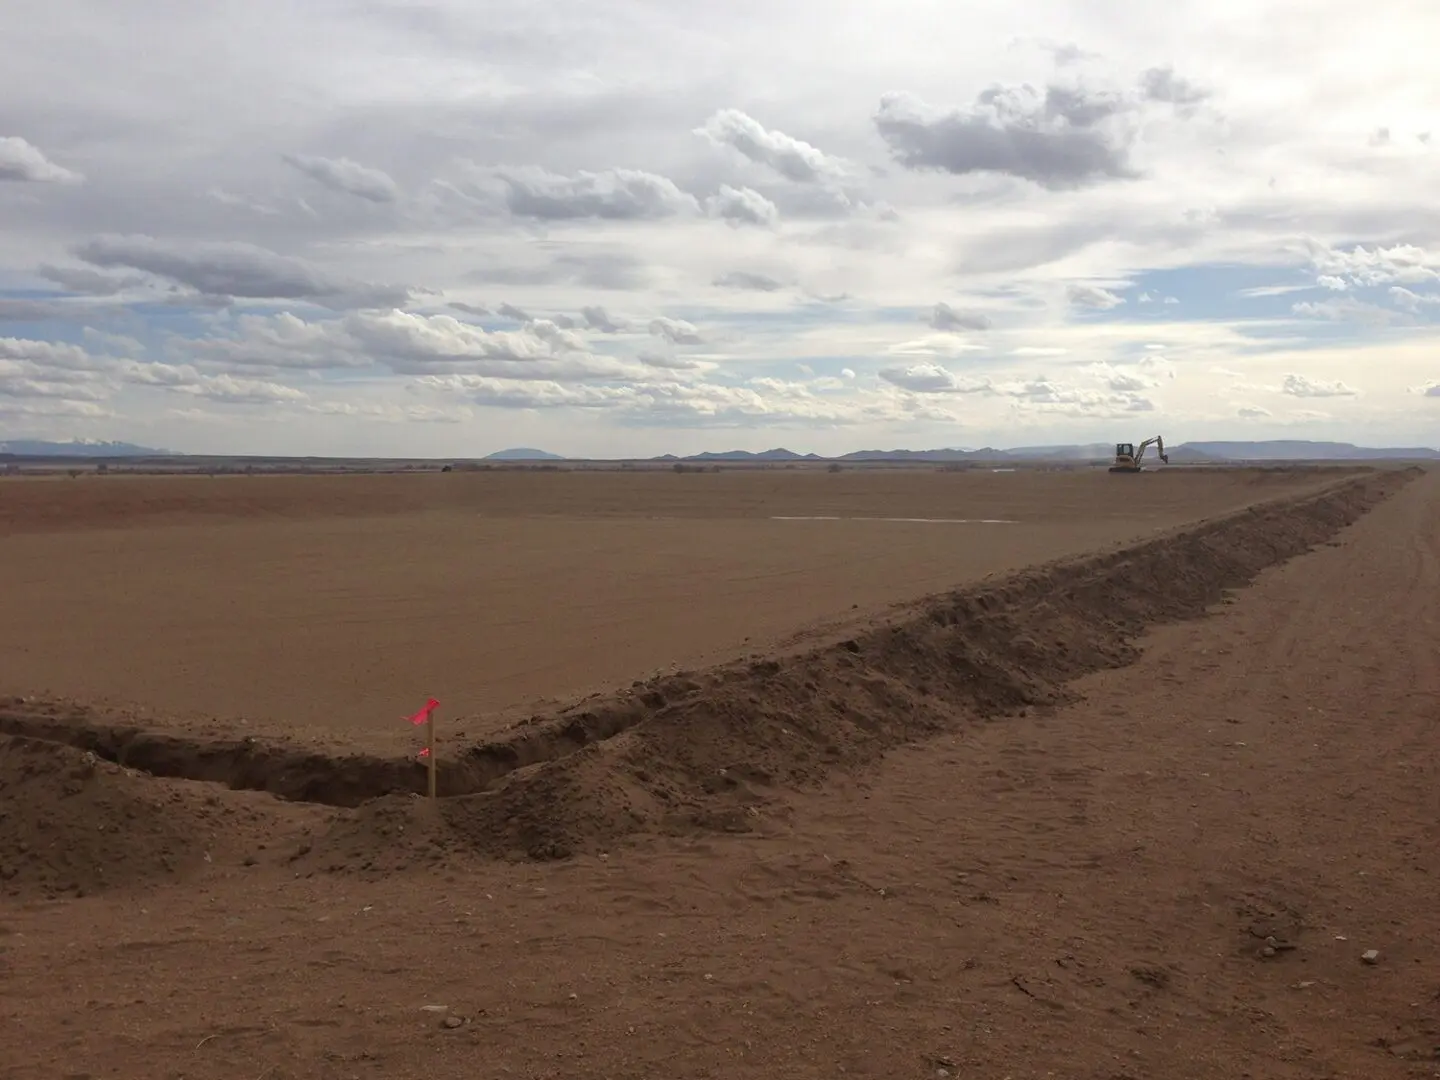 A dirt field with a red flag in the middle of it.